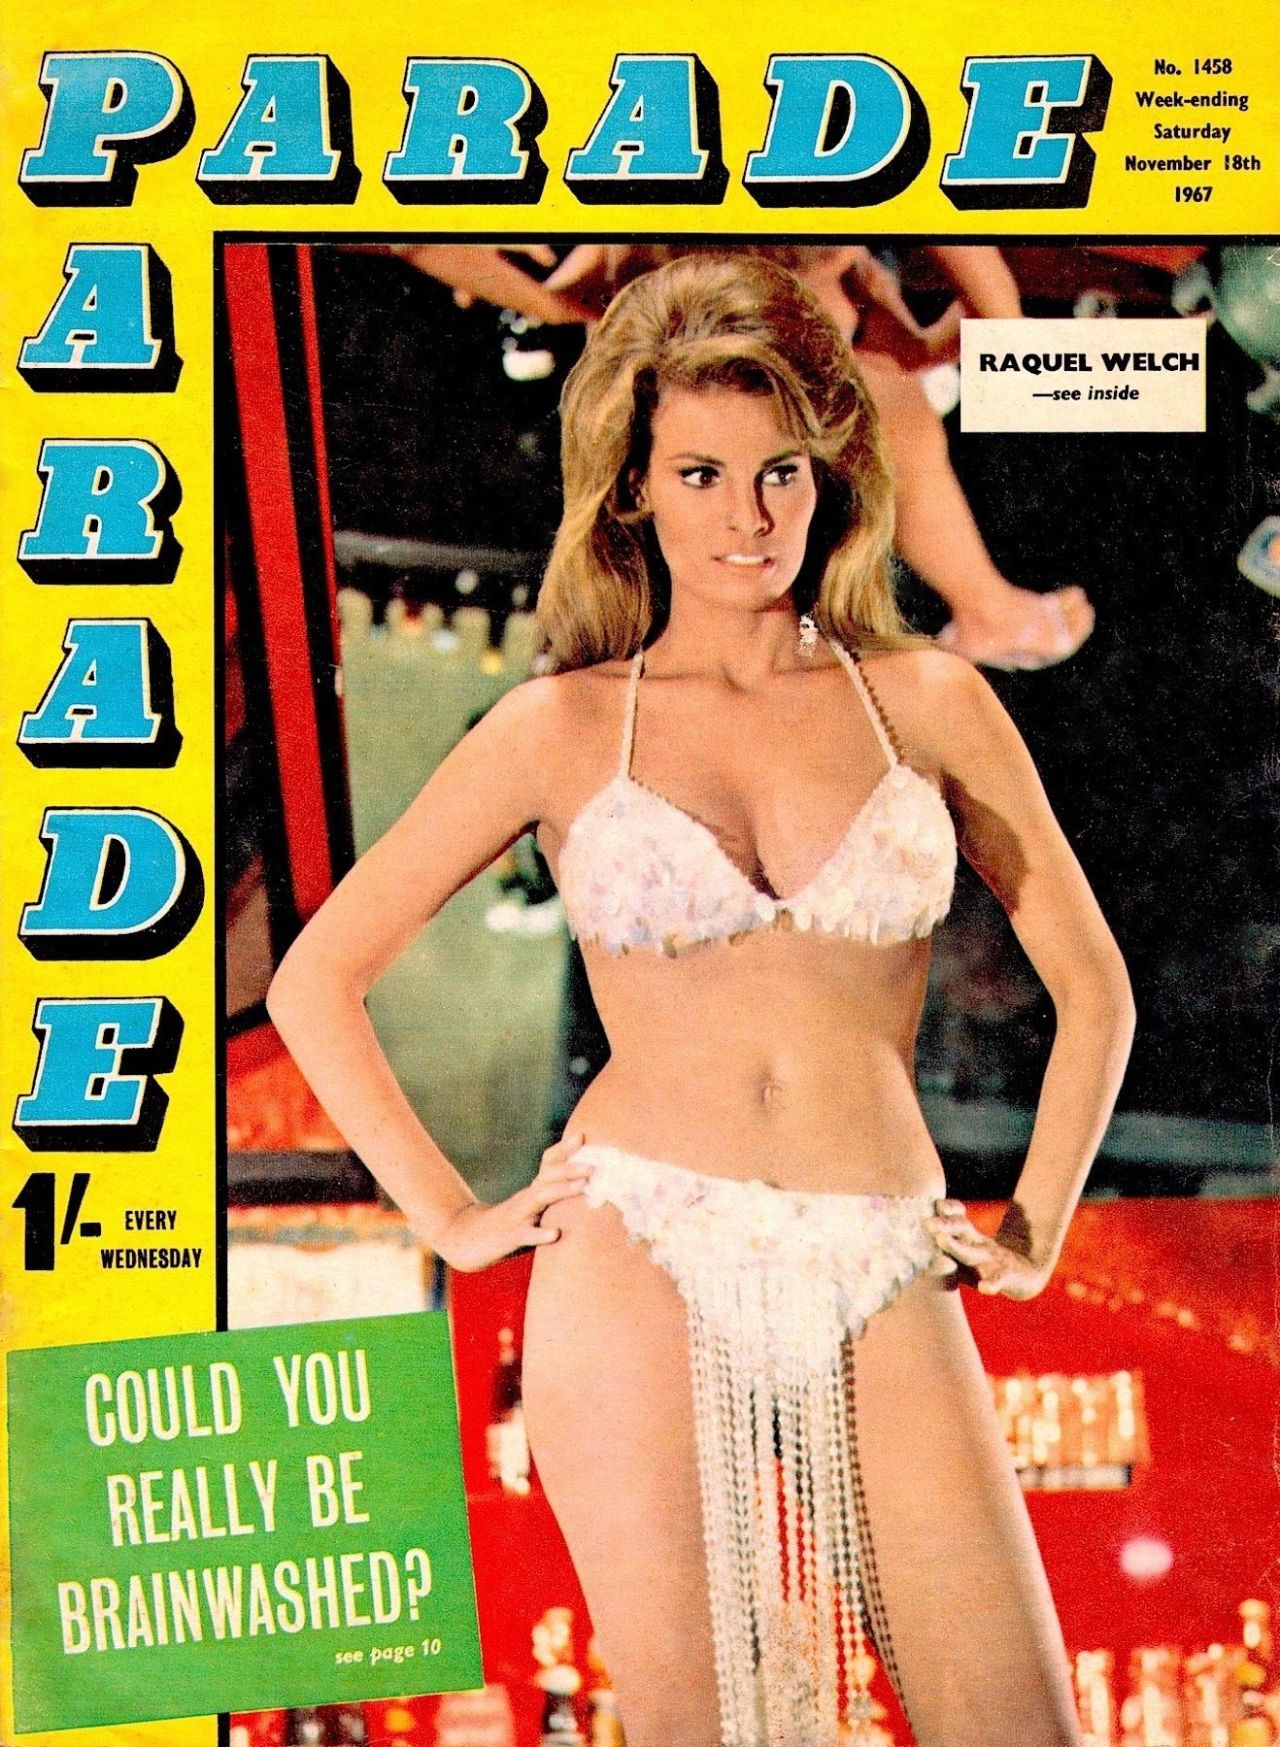 Parade 1967 - Raquel Welch on the cover